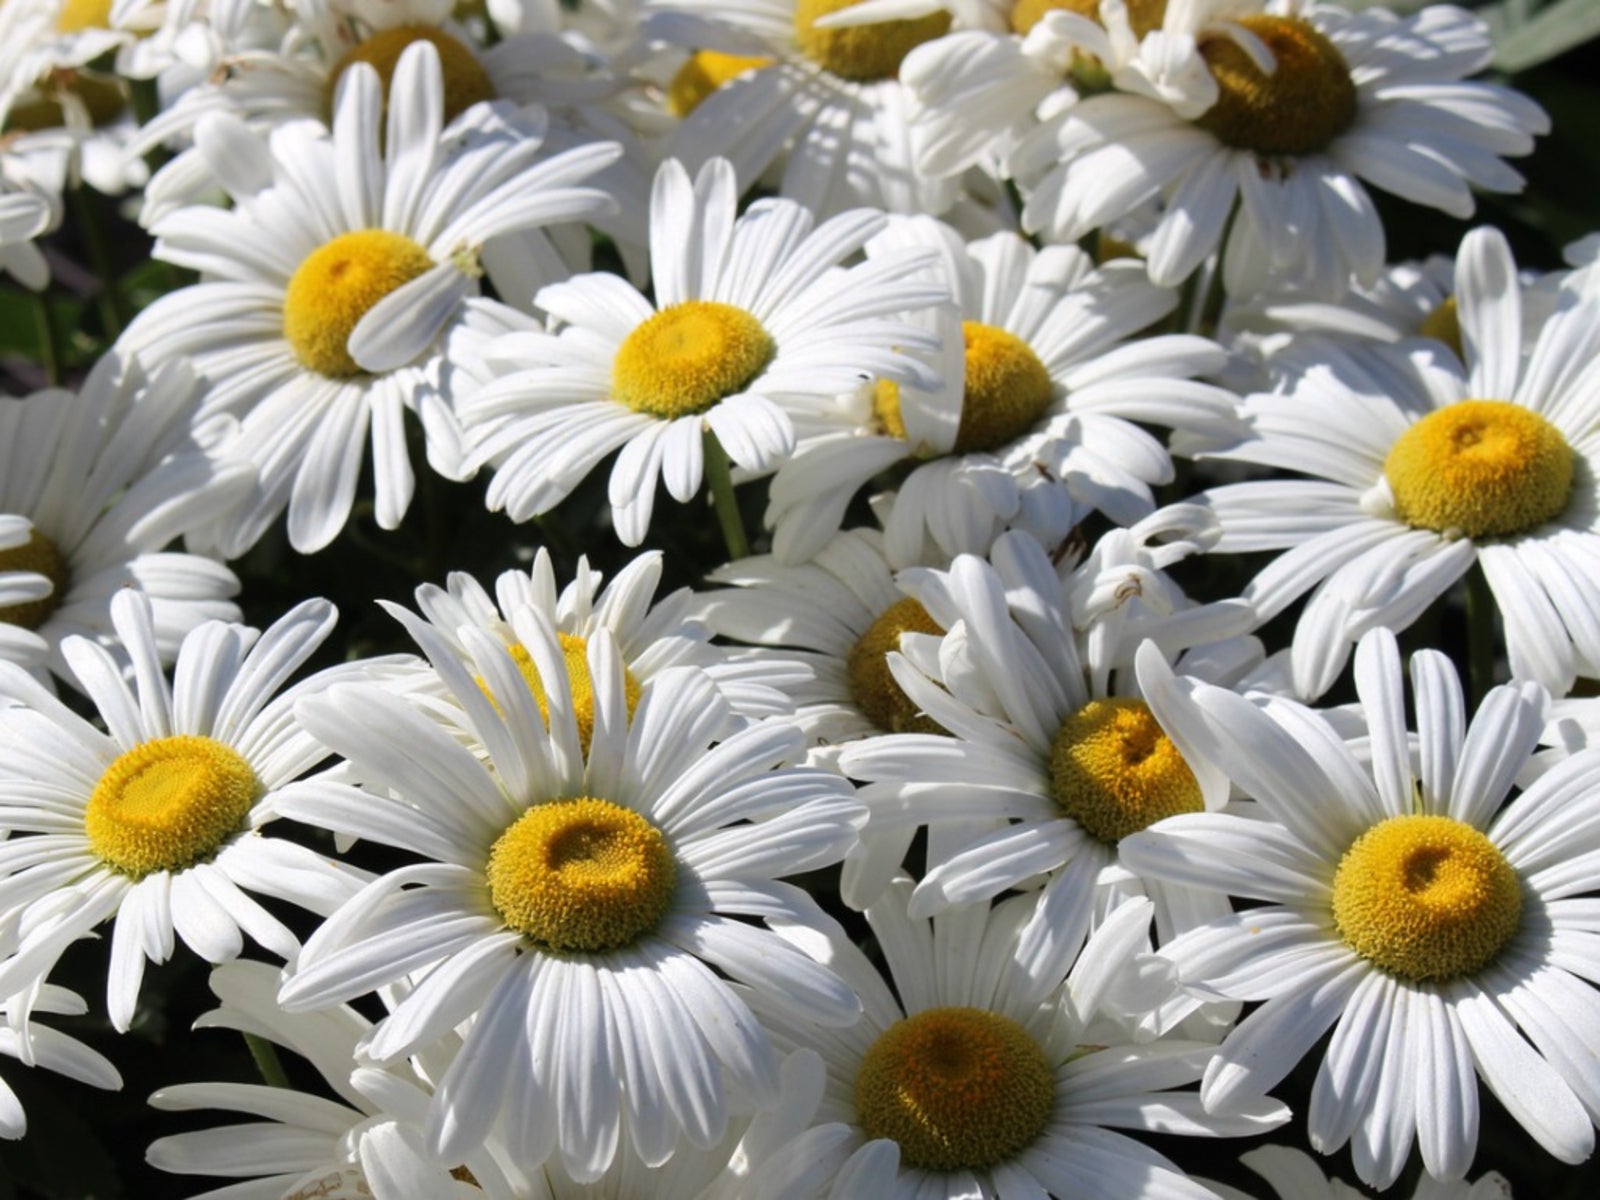 How to Grow and Care for the Oxeye Daisy